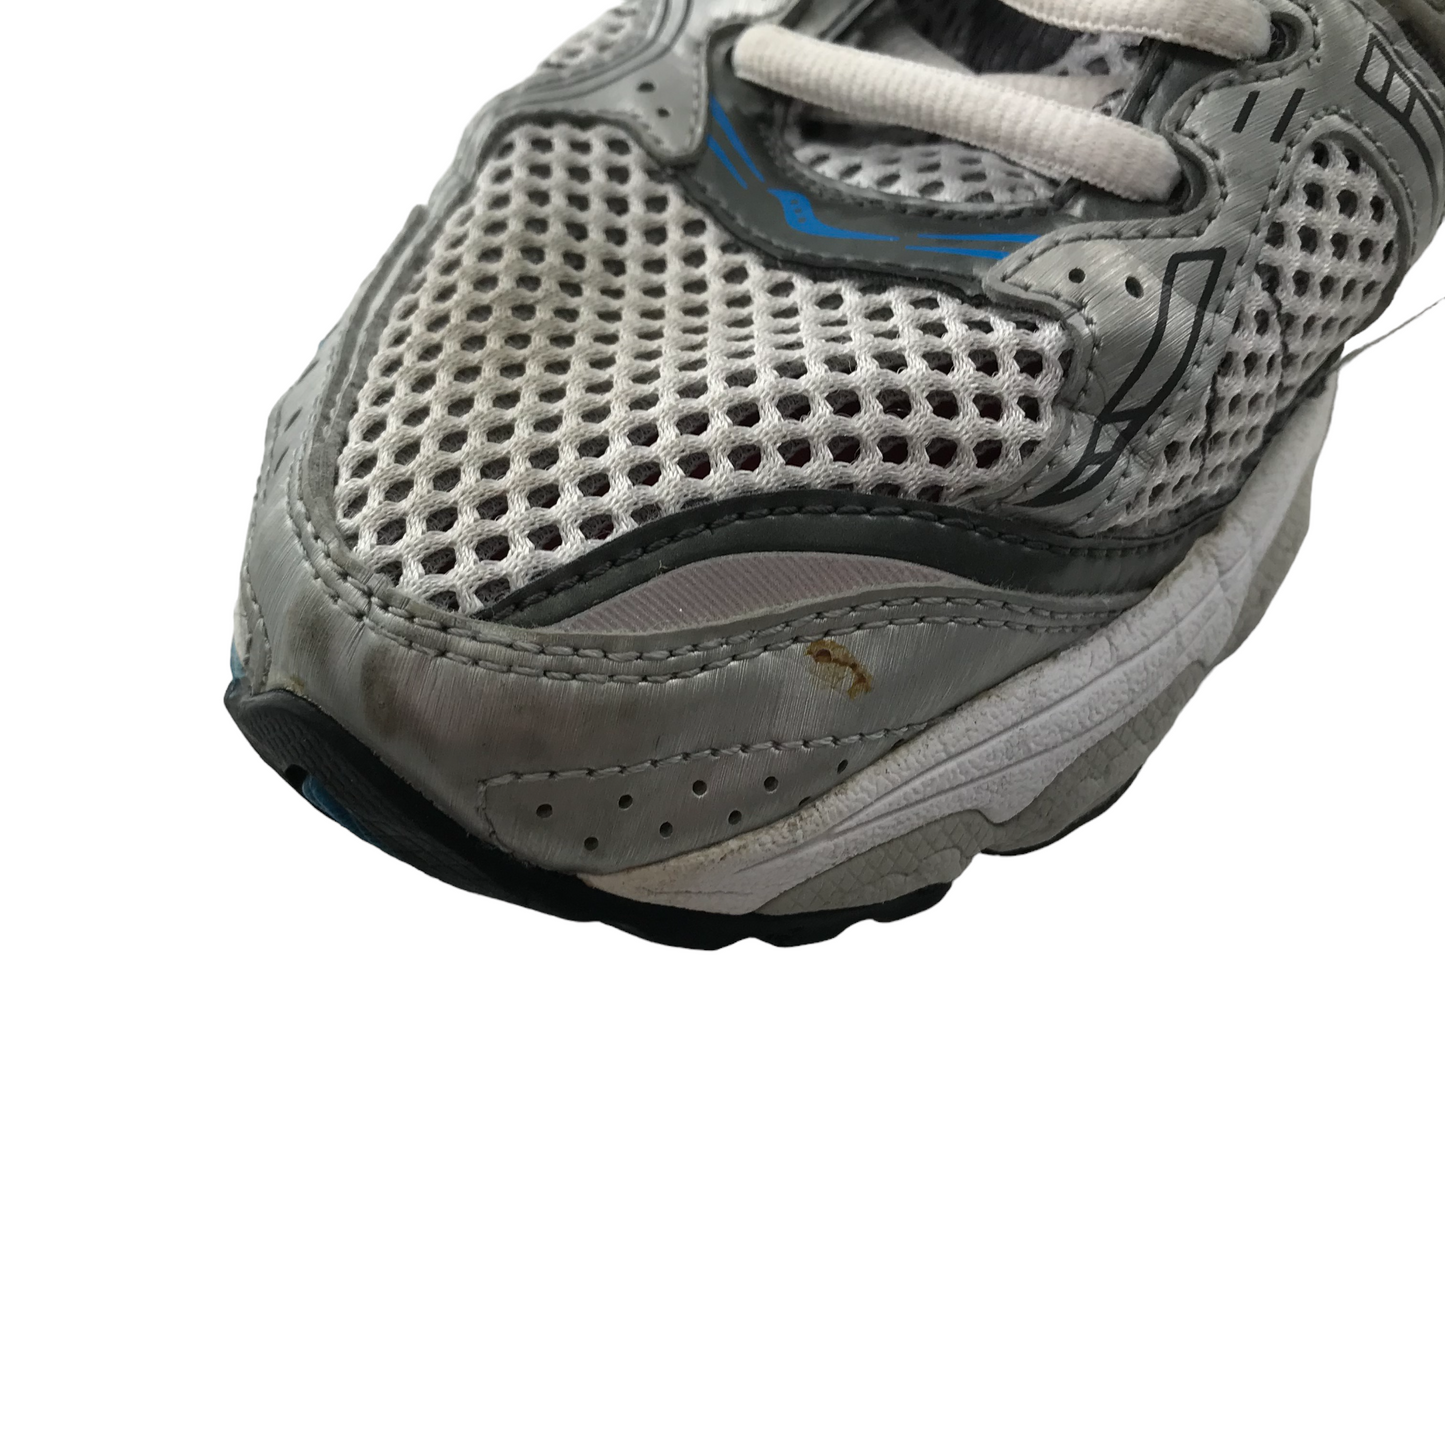 Saucony Grey Trail Running Trainers Shoe Size 7